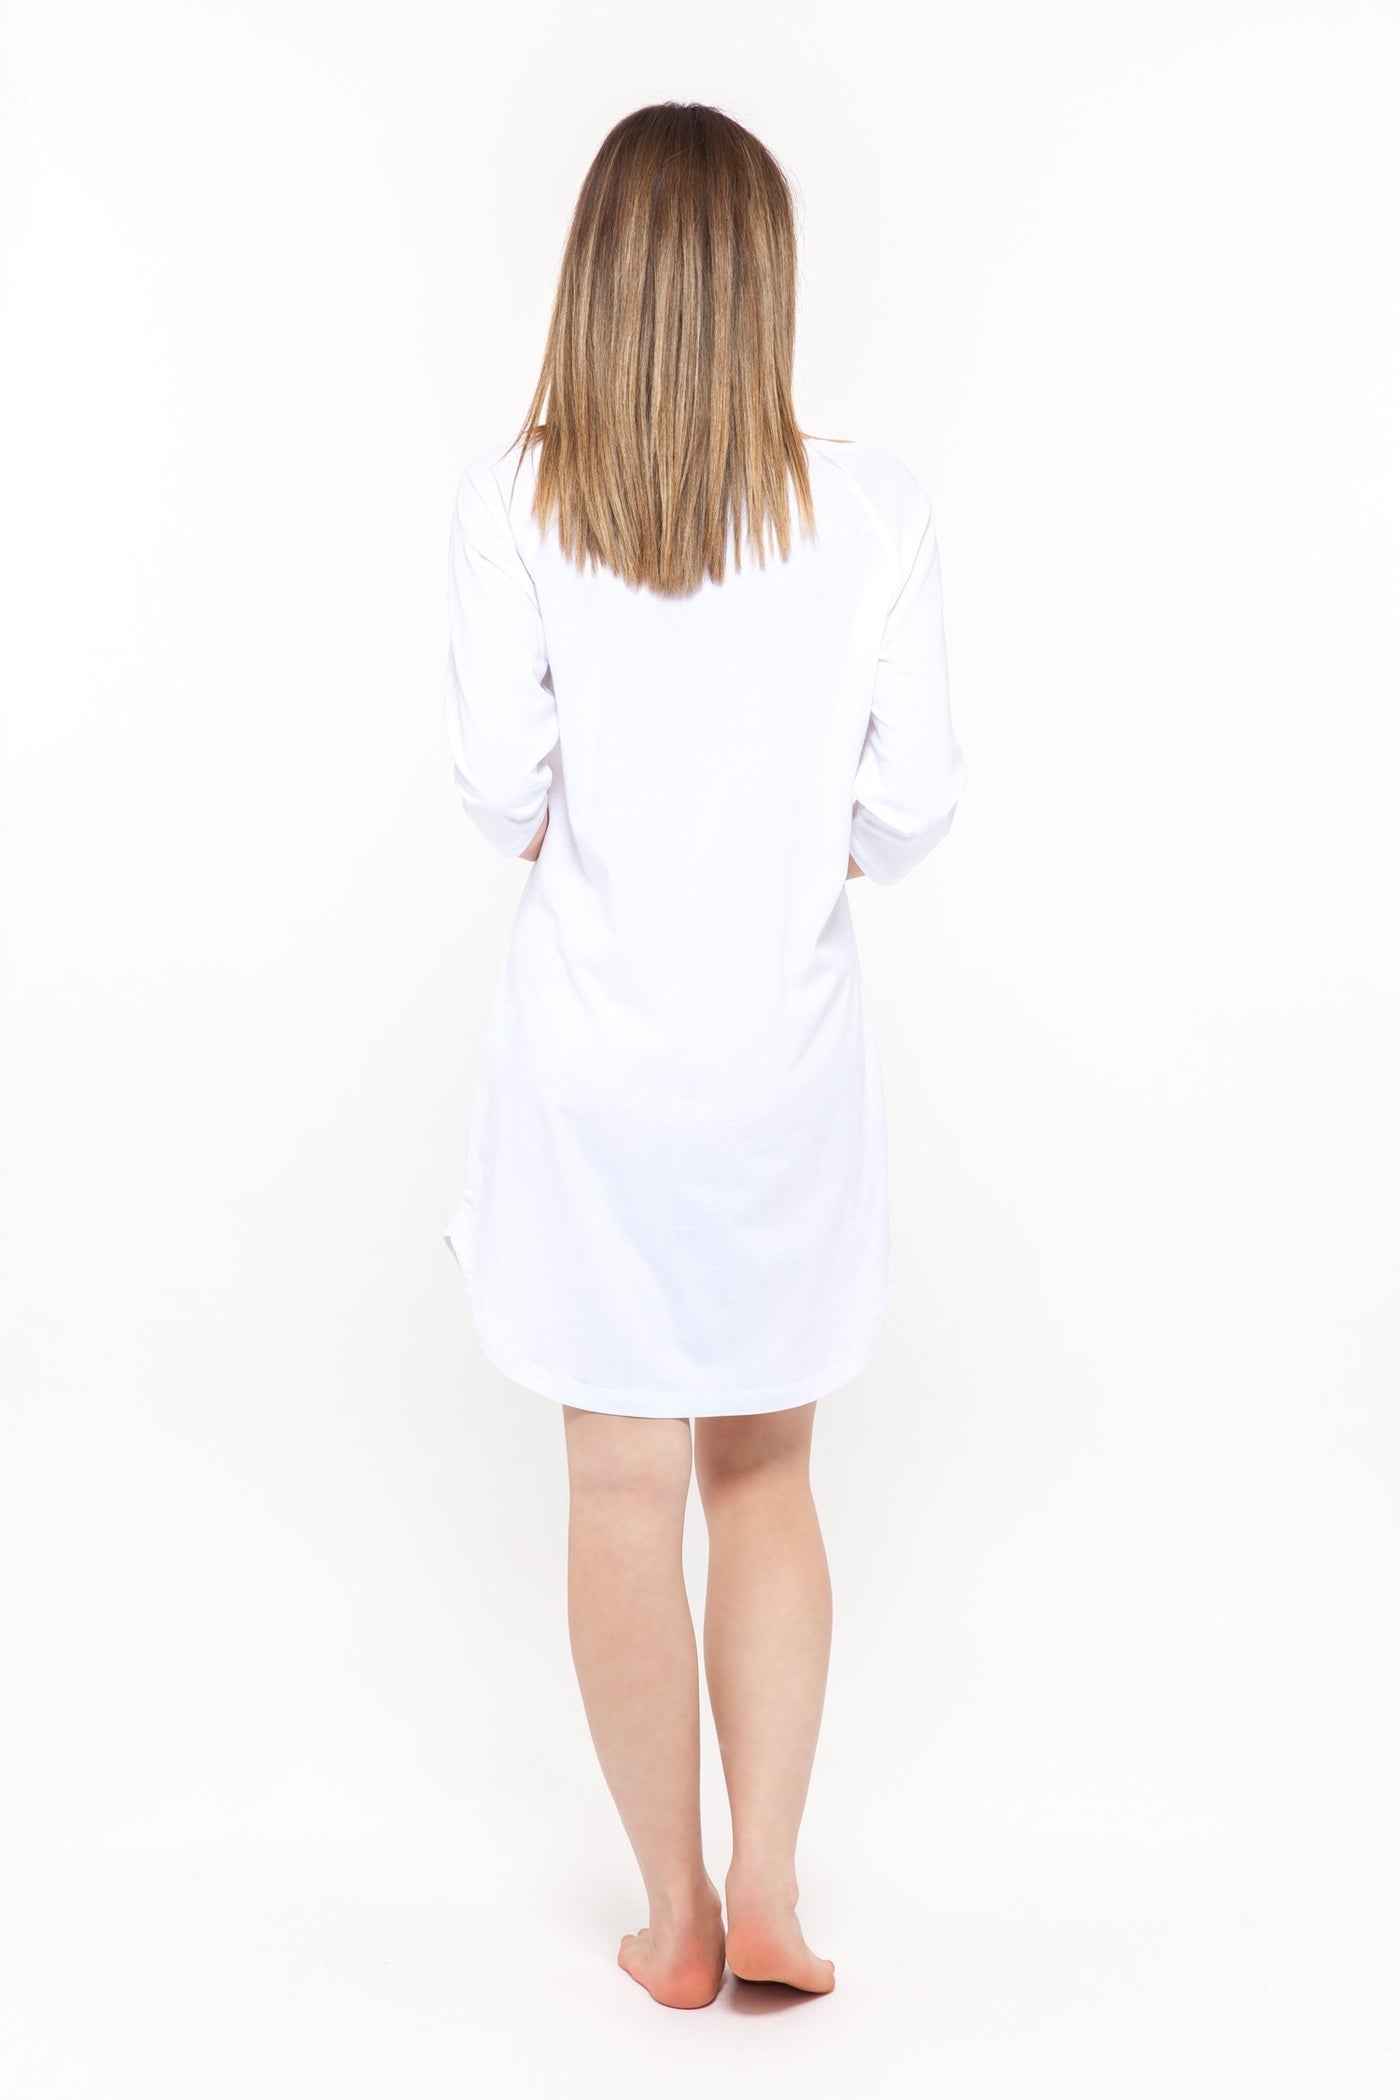 chassca 3/4 arm white nightdress - Breakmood